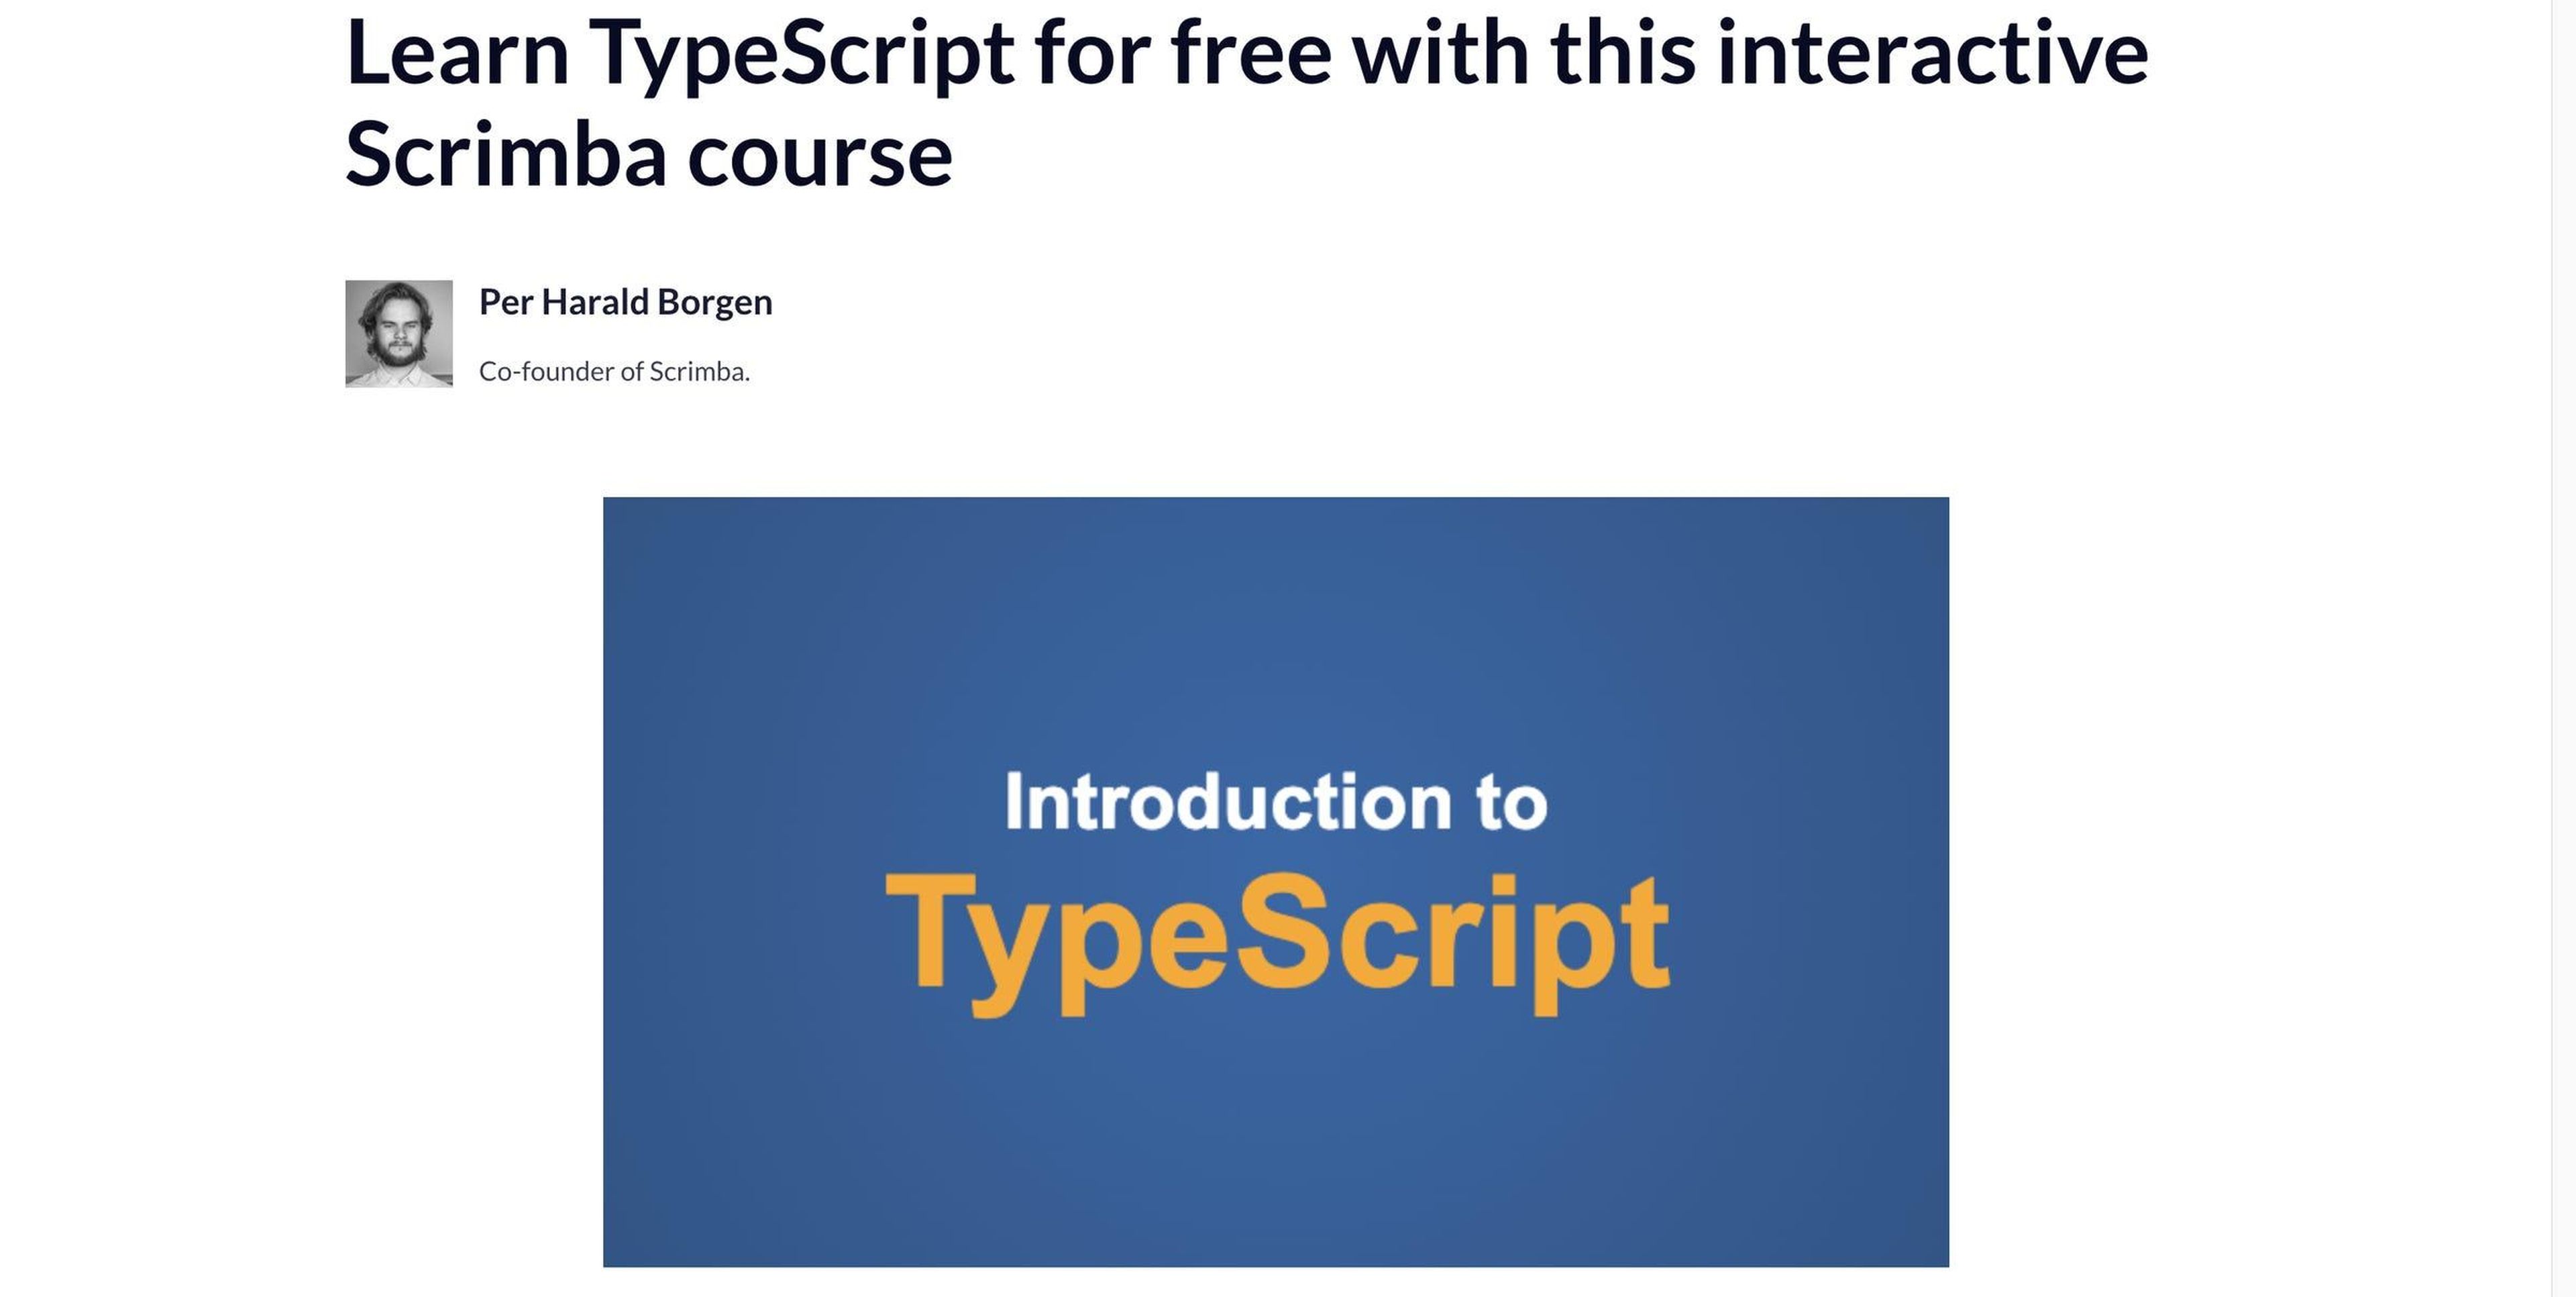 TypeScript is associated with an average global salary of $57,433.70